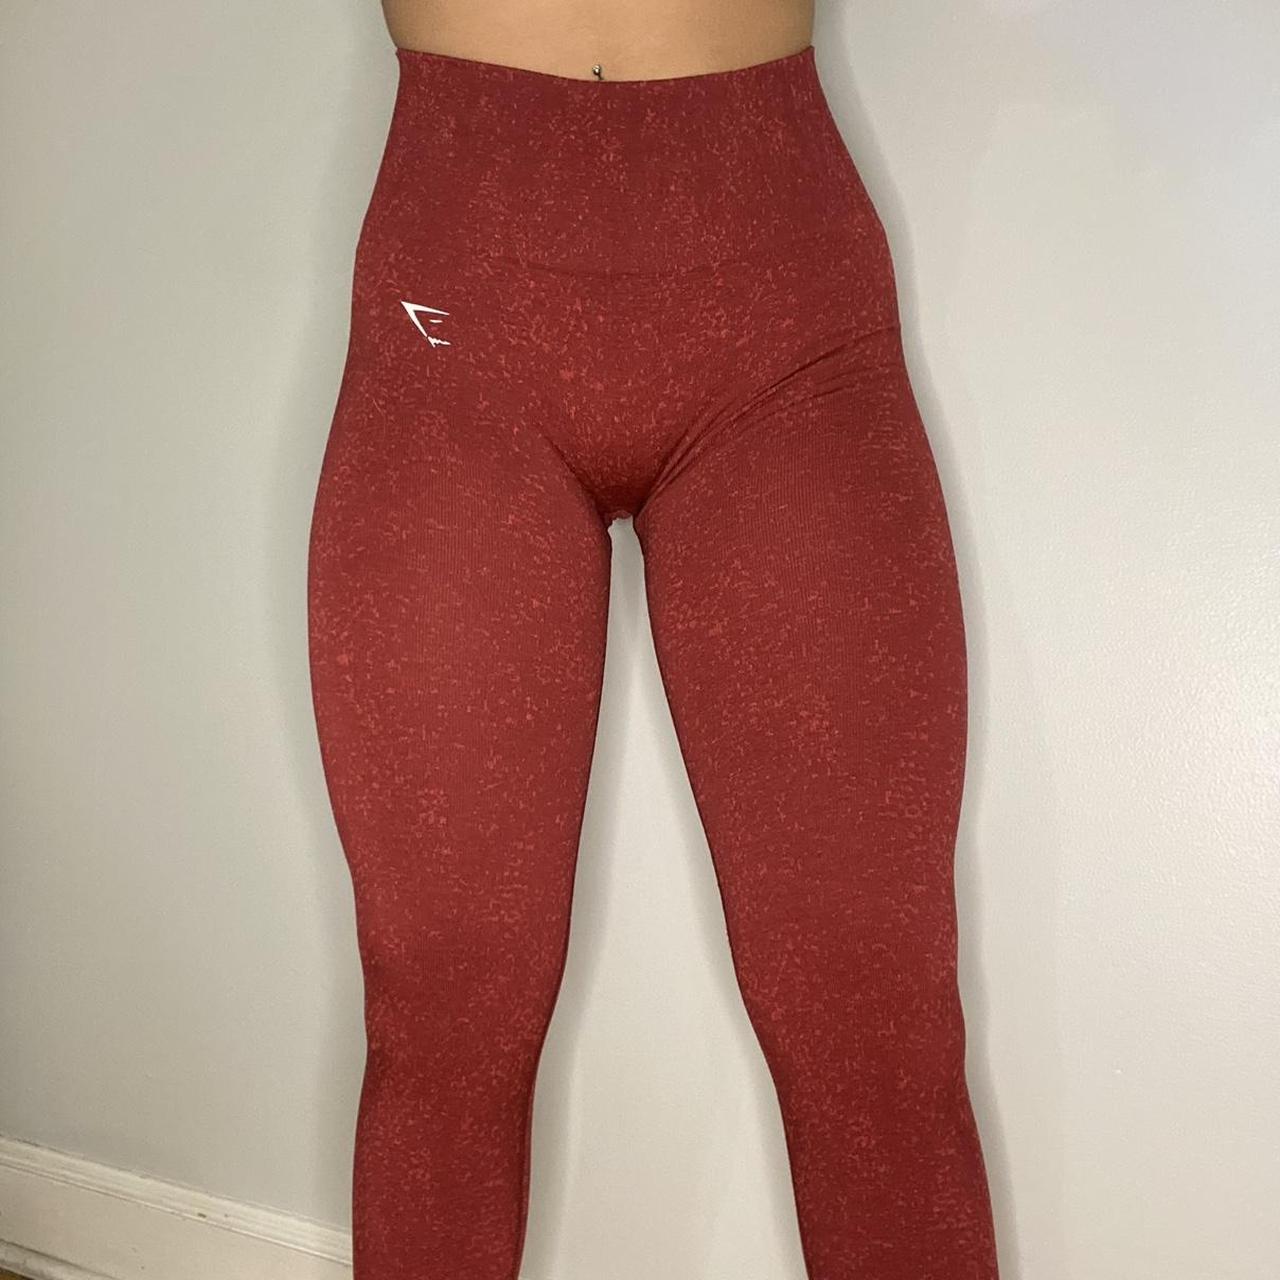 Pact Leggings, Size M, Burgundy Ribbed, Never been - Depop